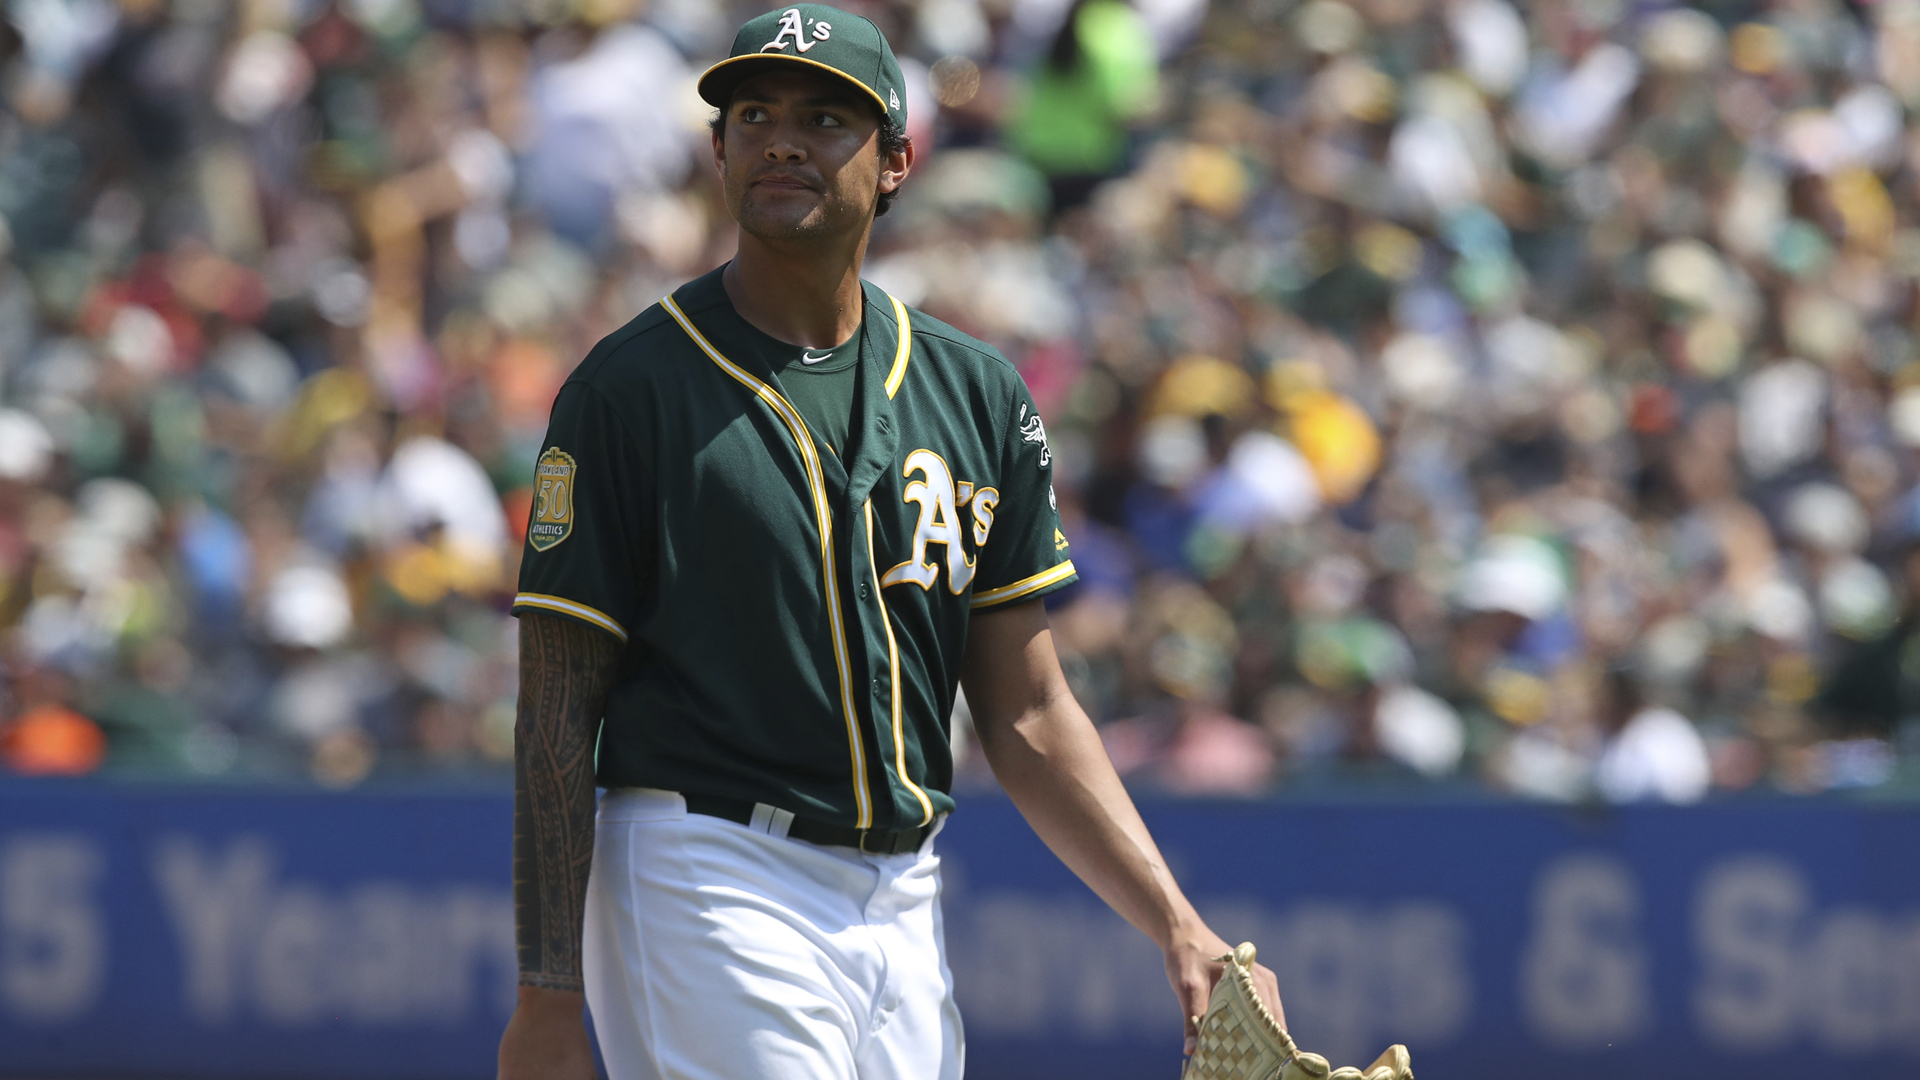 A's ace Sean Manaea shut down indefinitely with shoulder tendinitis